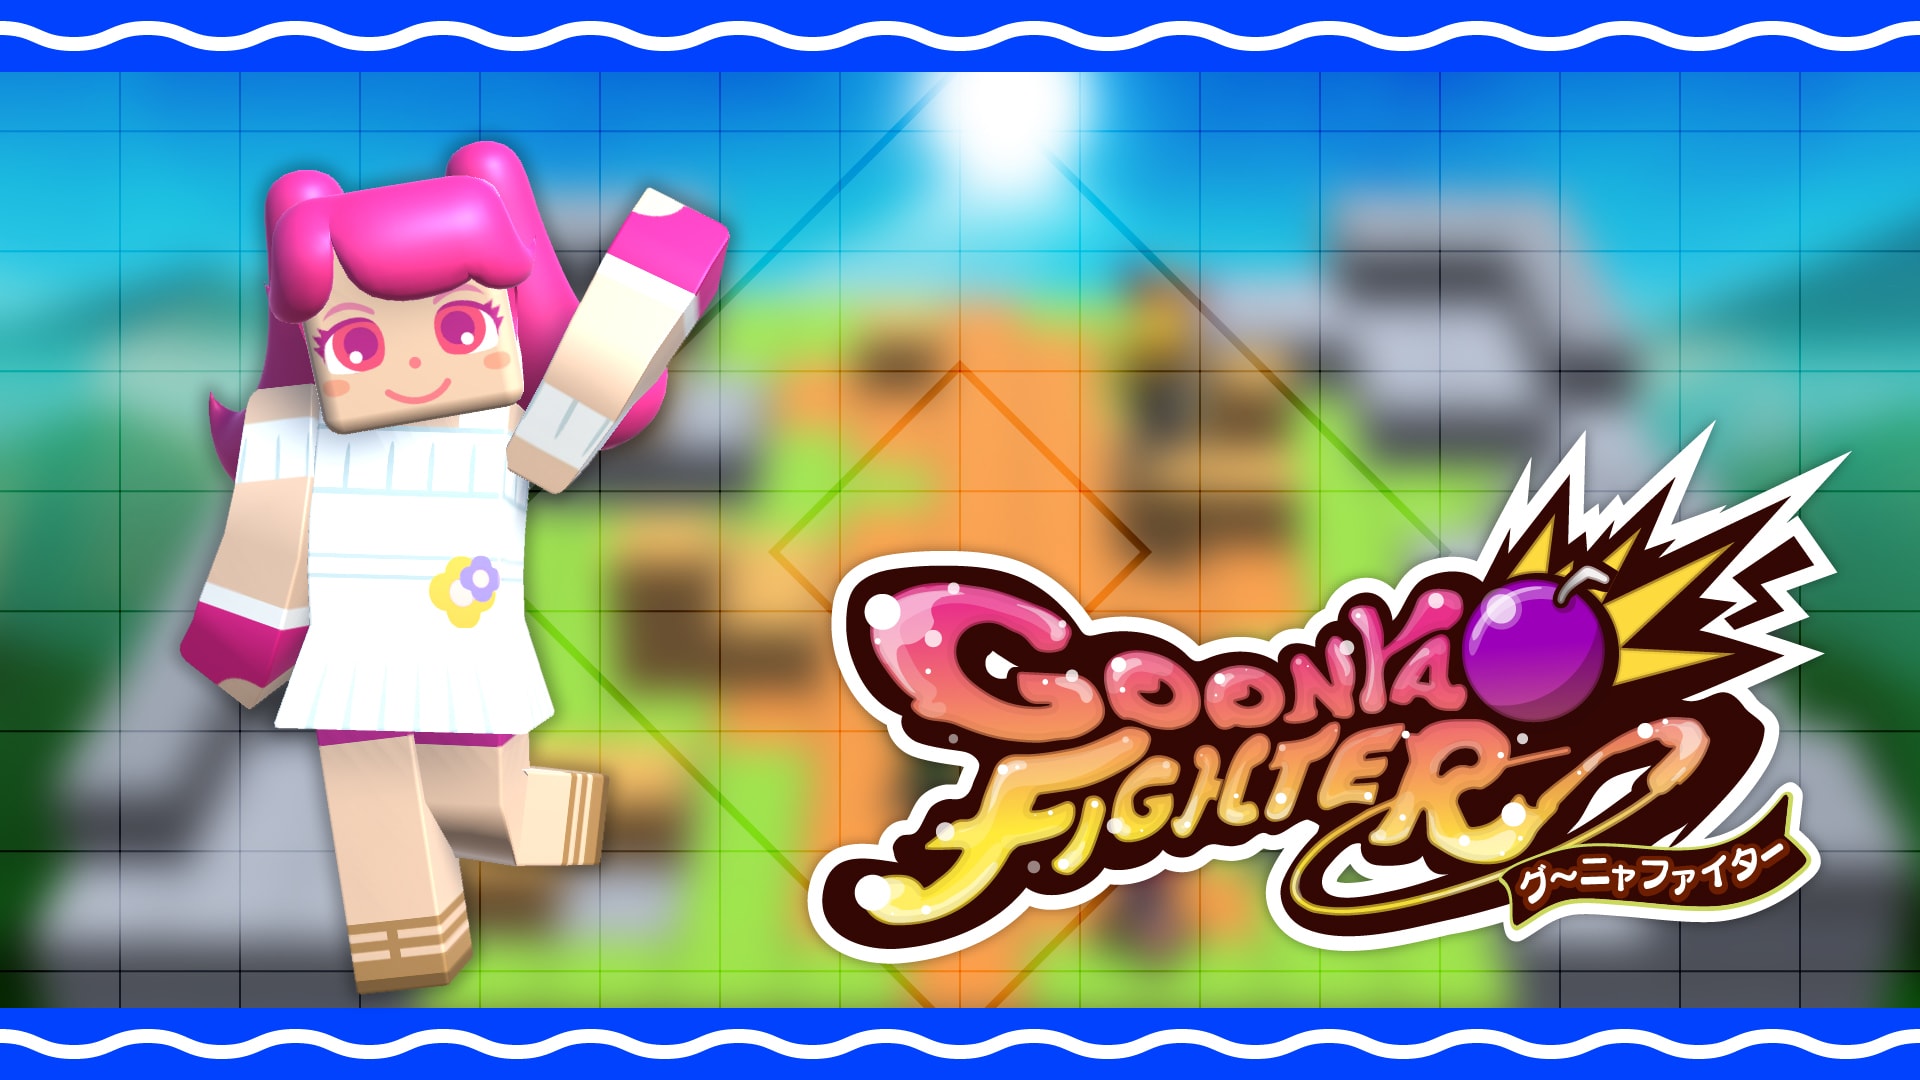 Additional skin: Pudding (Summer Vacation ver.)